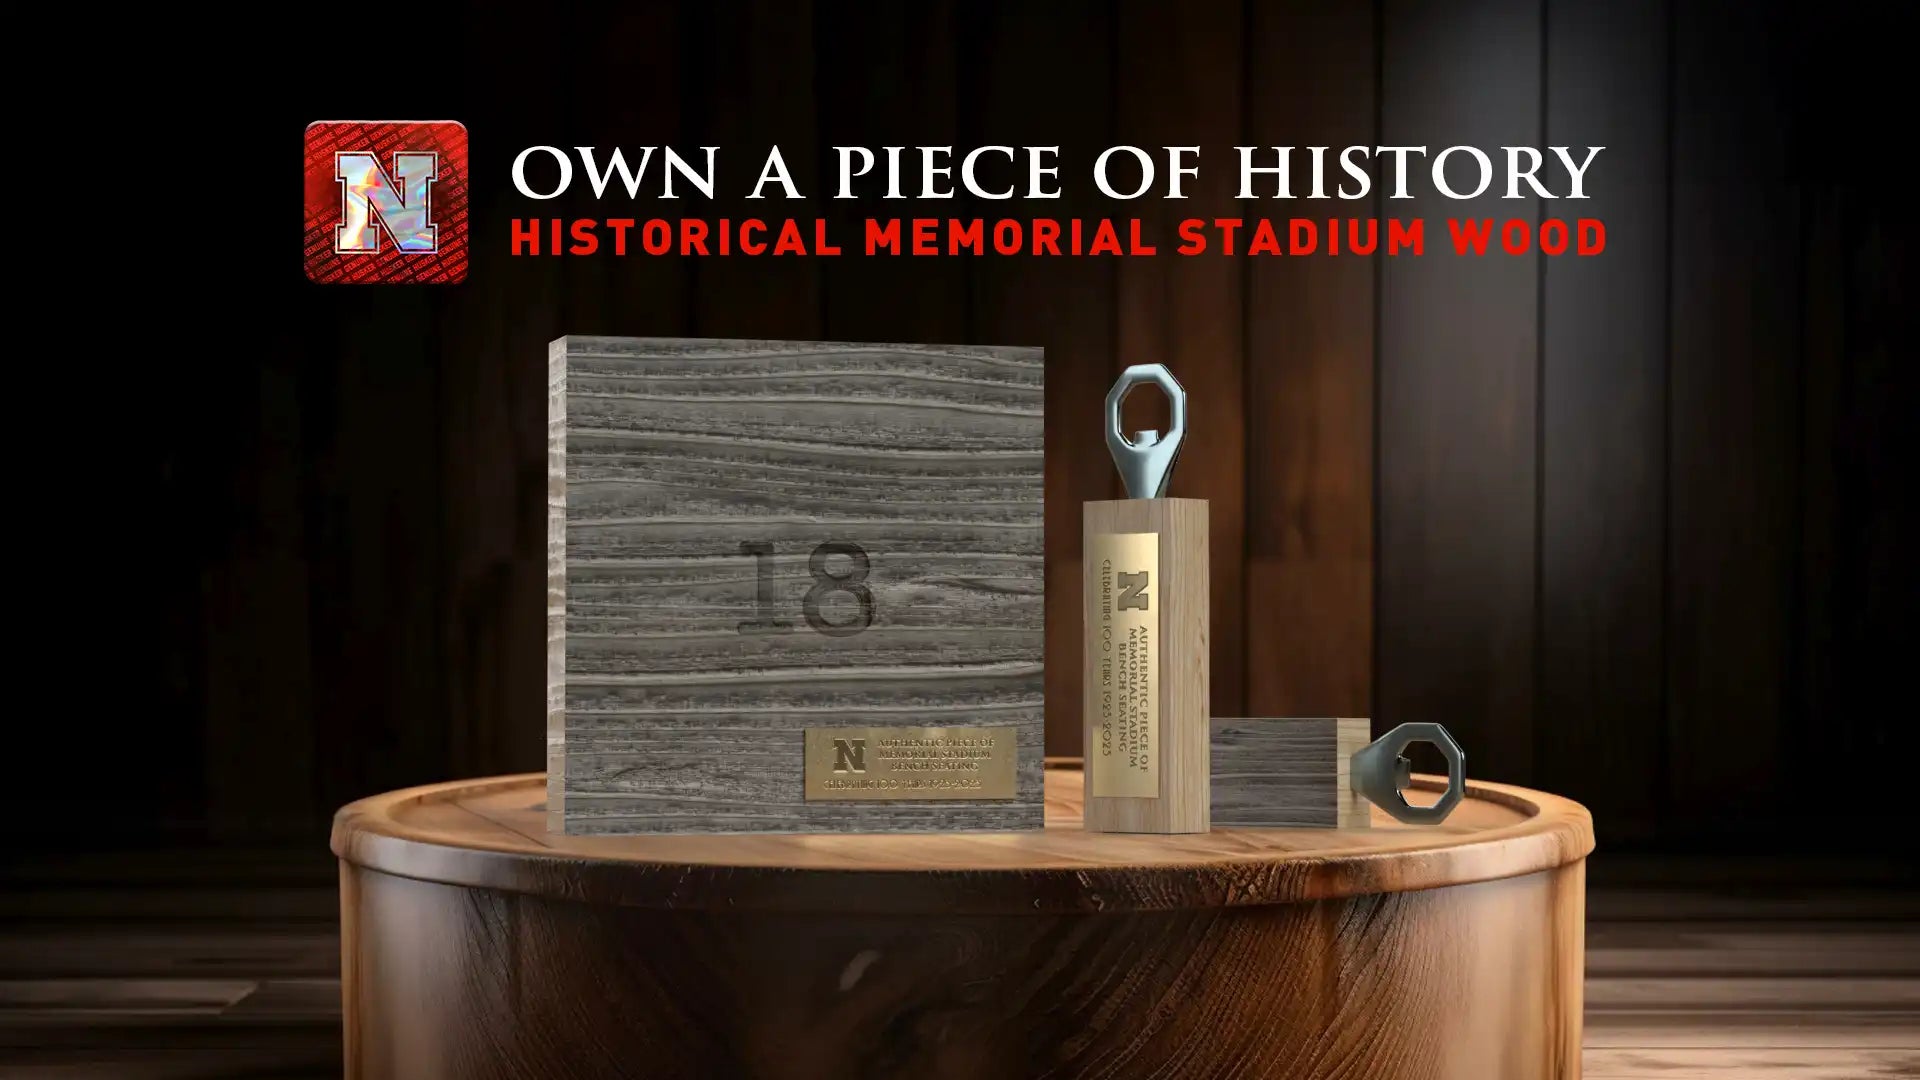 Own a piece of history with these products made from genuine memorial stadium wood. 